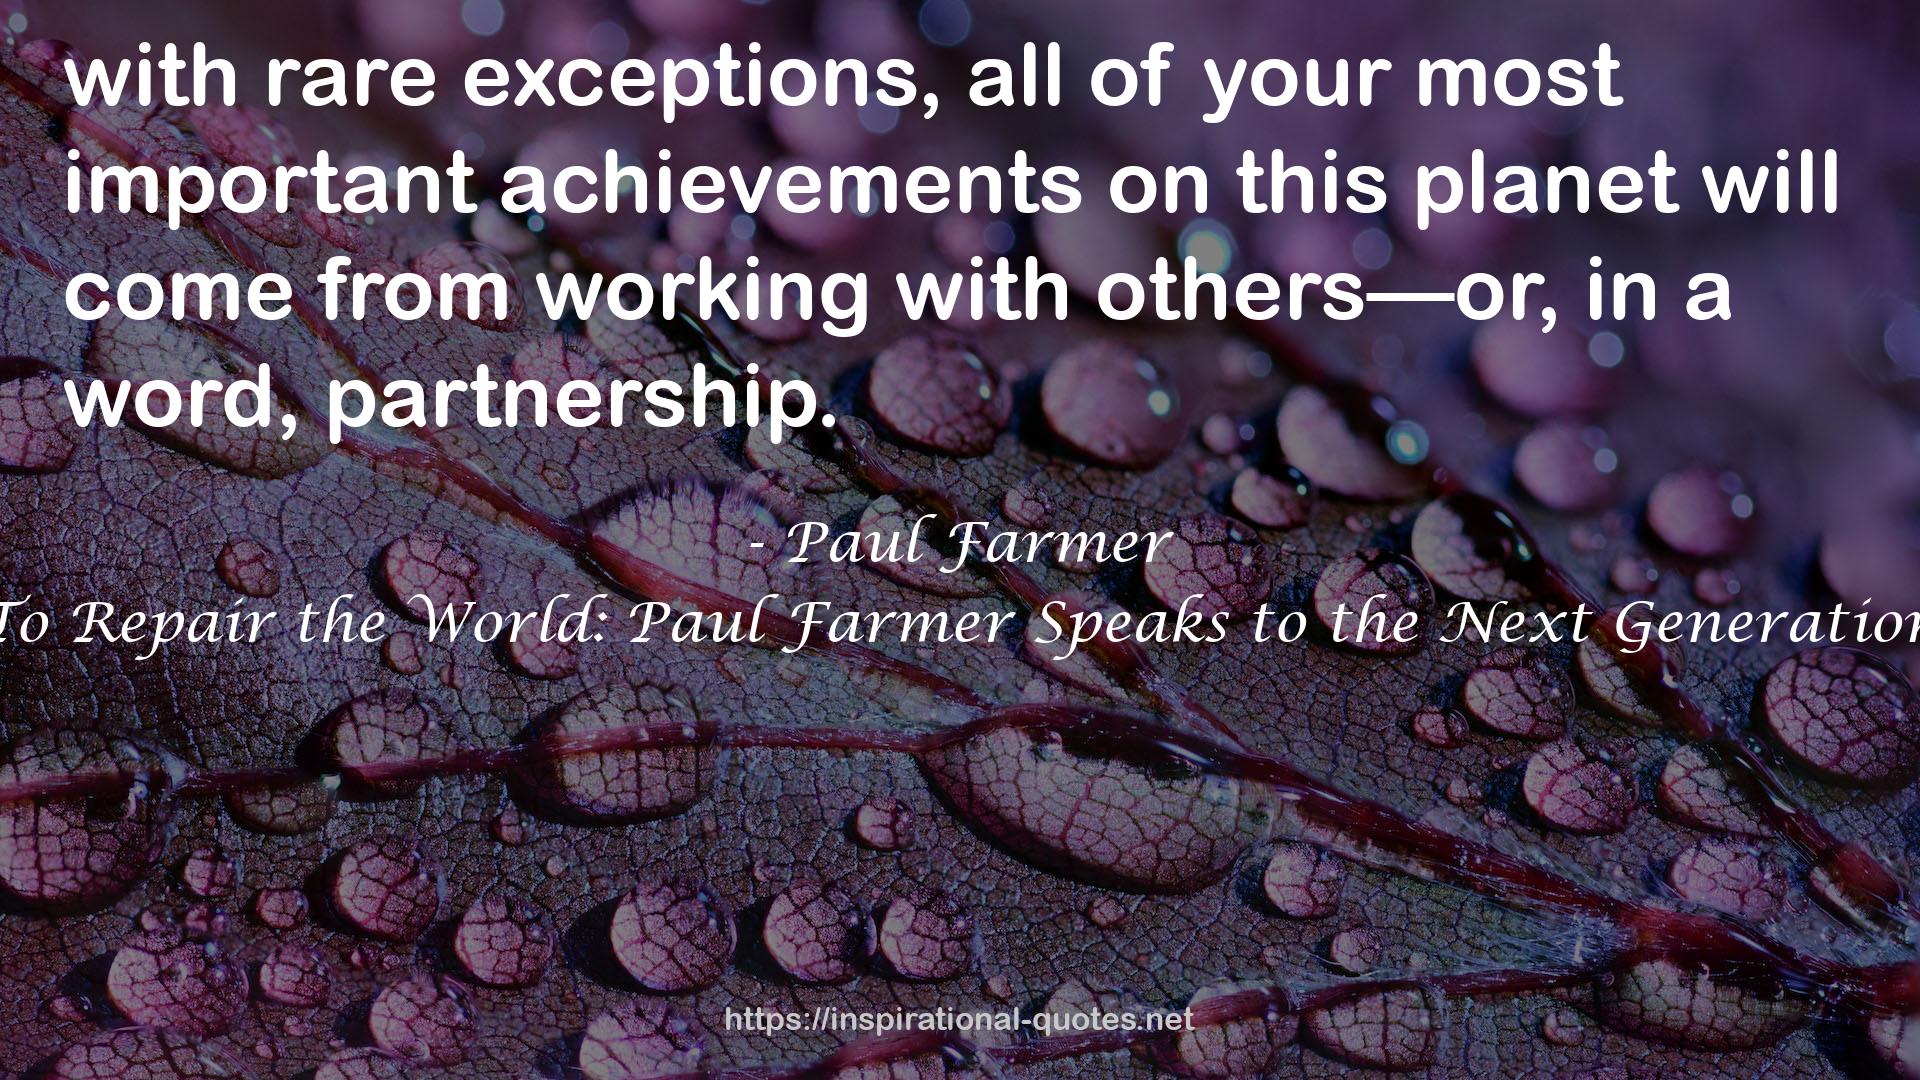 To Repair the World: Paul Farmer Speaks to the Next Generation QUOTES